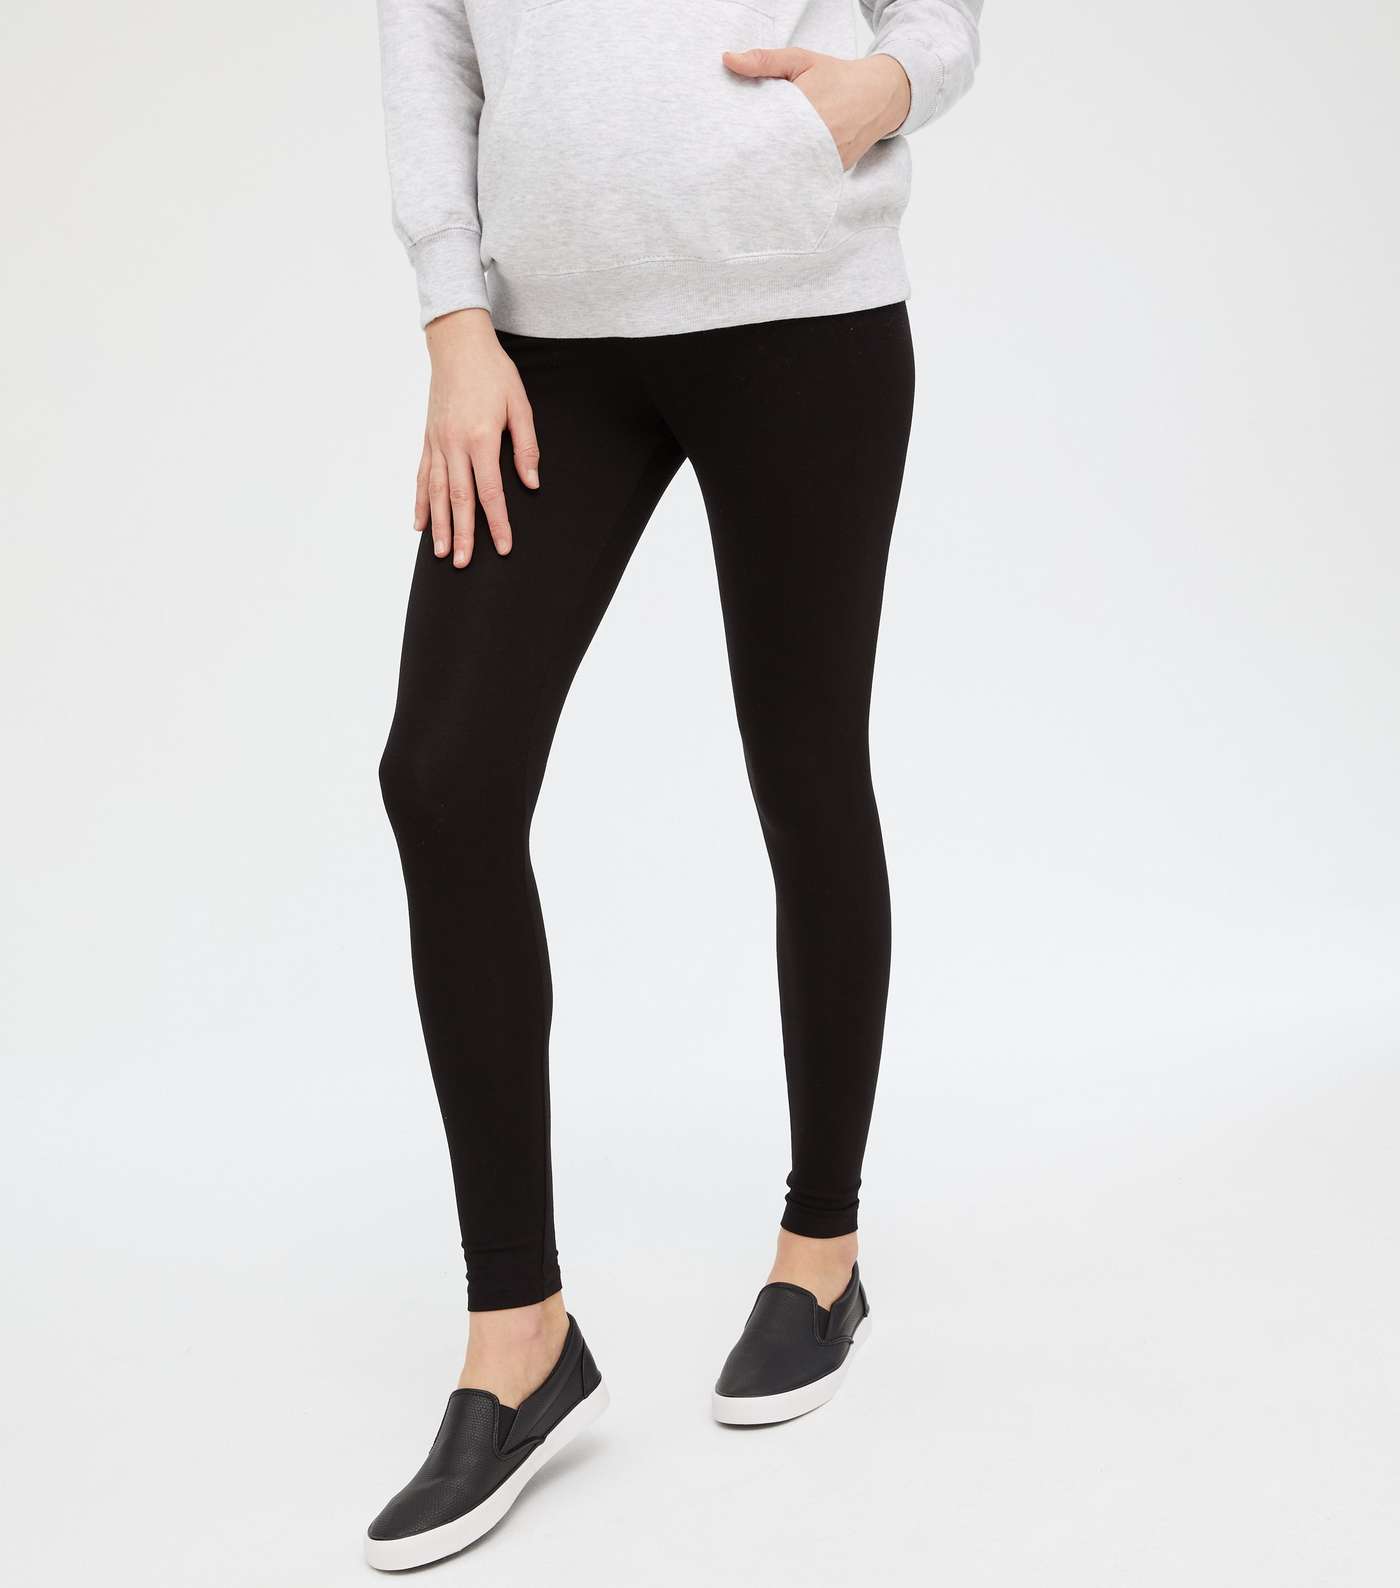 Maternity 2 Pack Grey and Black Jersey Leggings Image 2